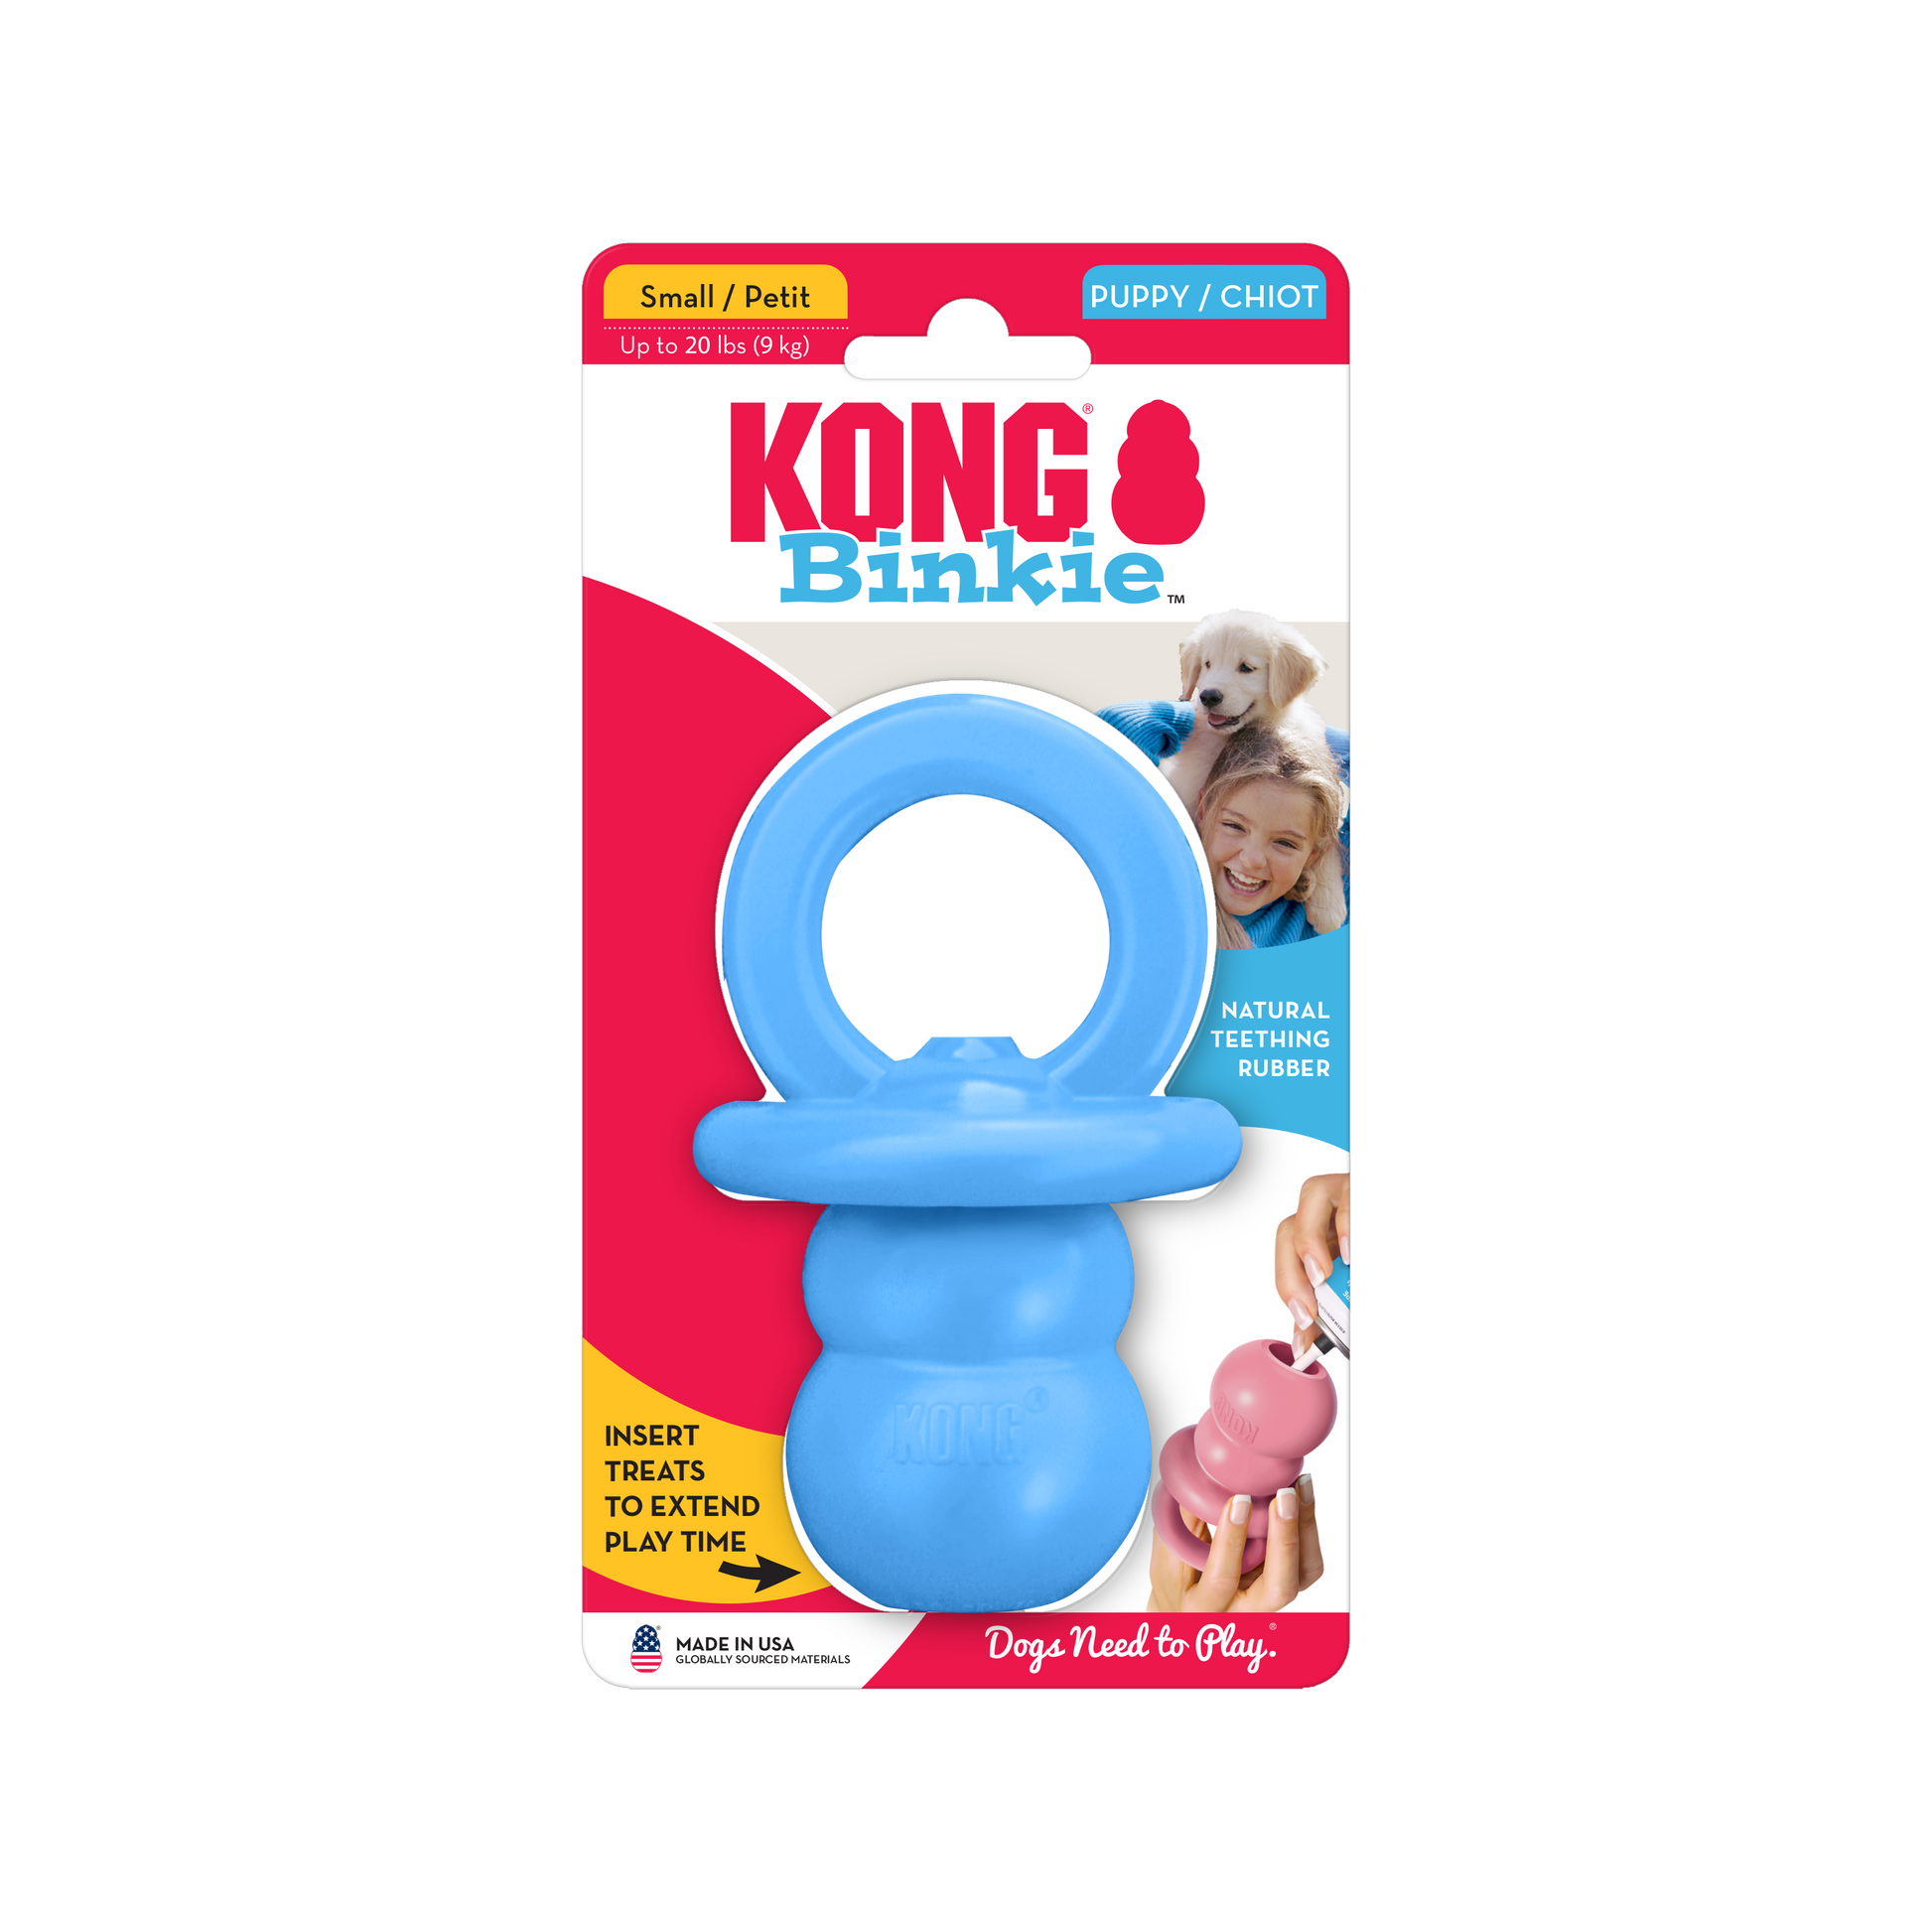 Your Whole Dog SALE: KONG Puppy Binkie.